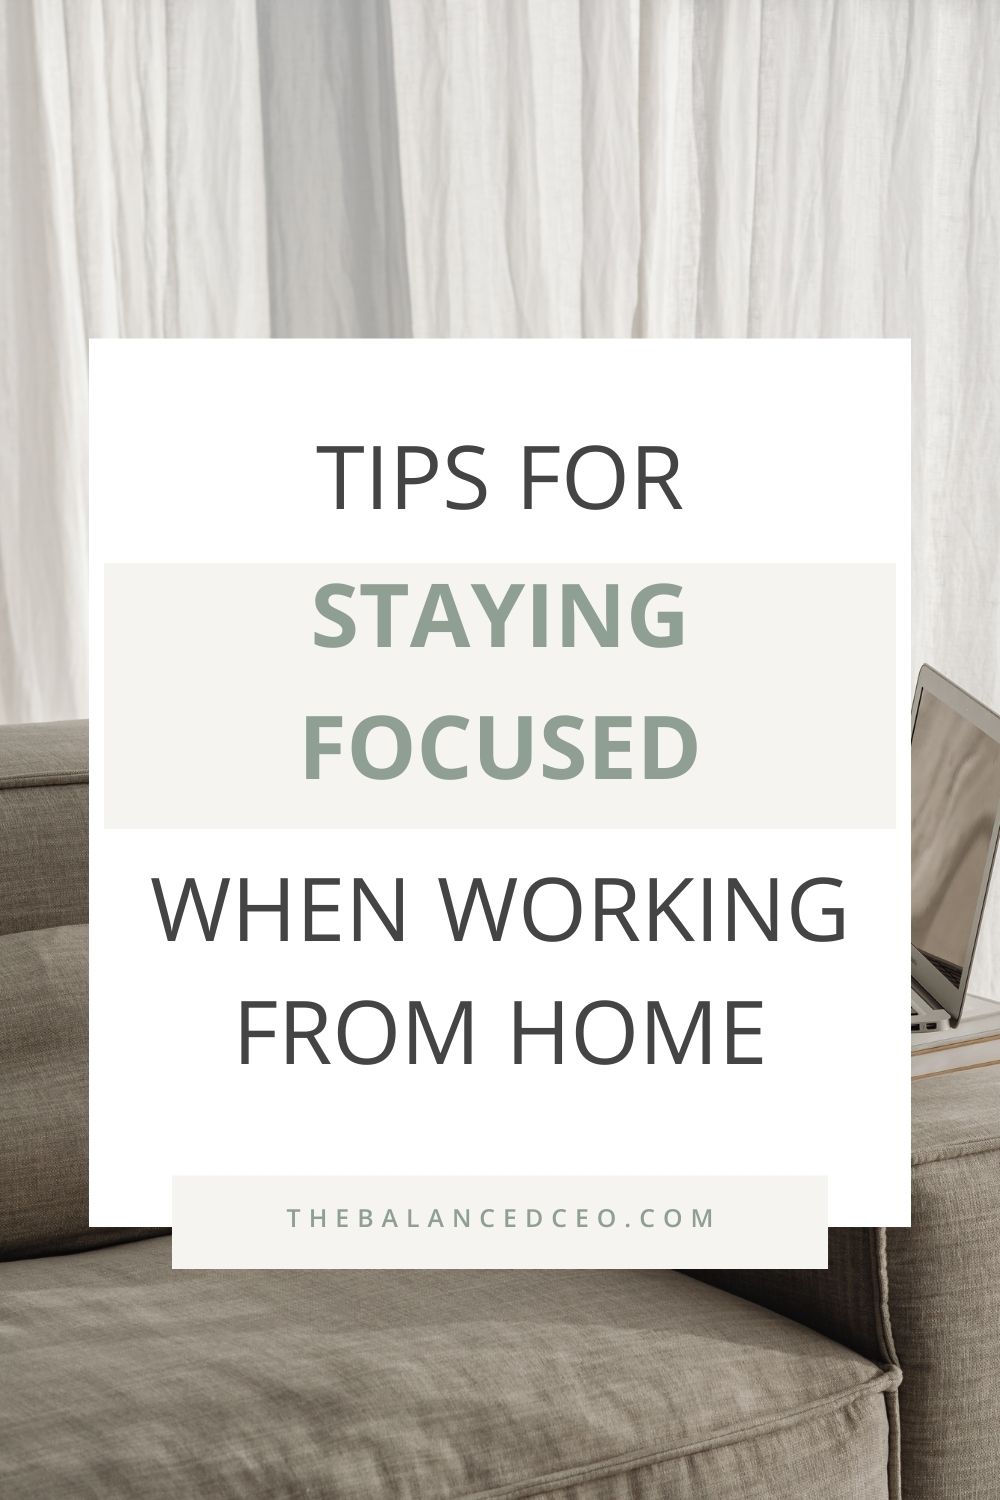 Tips for Staying Focused When Working from Home